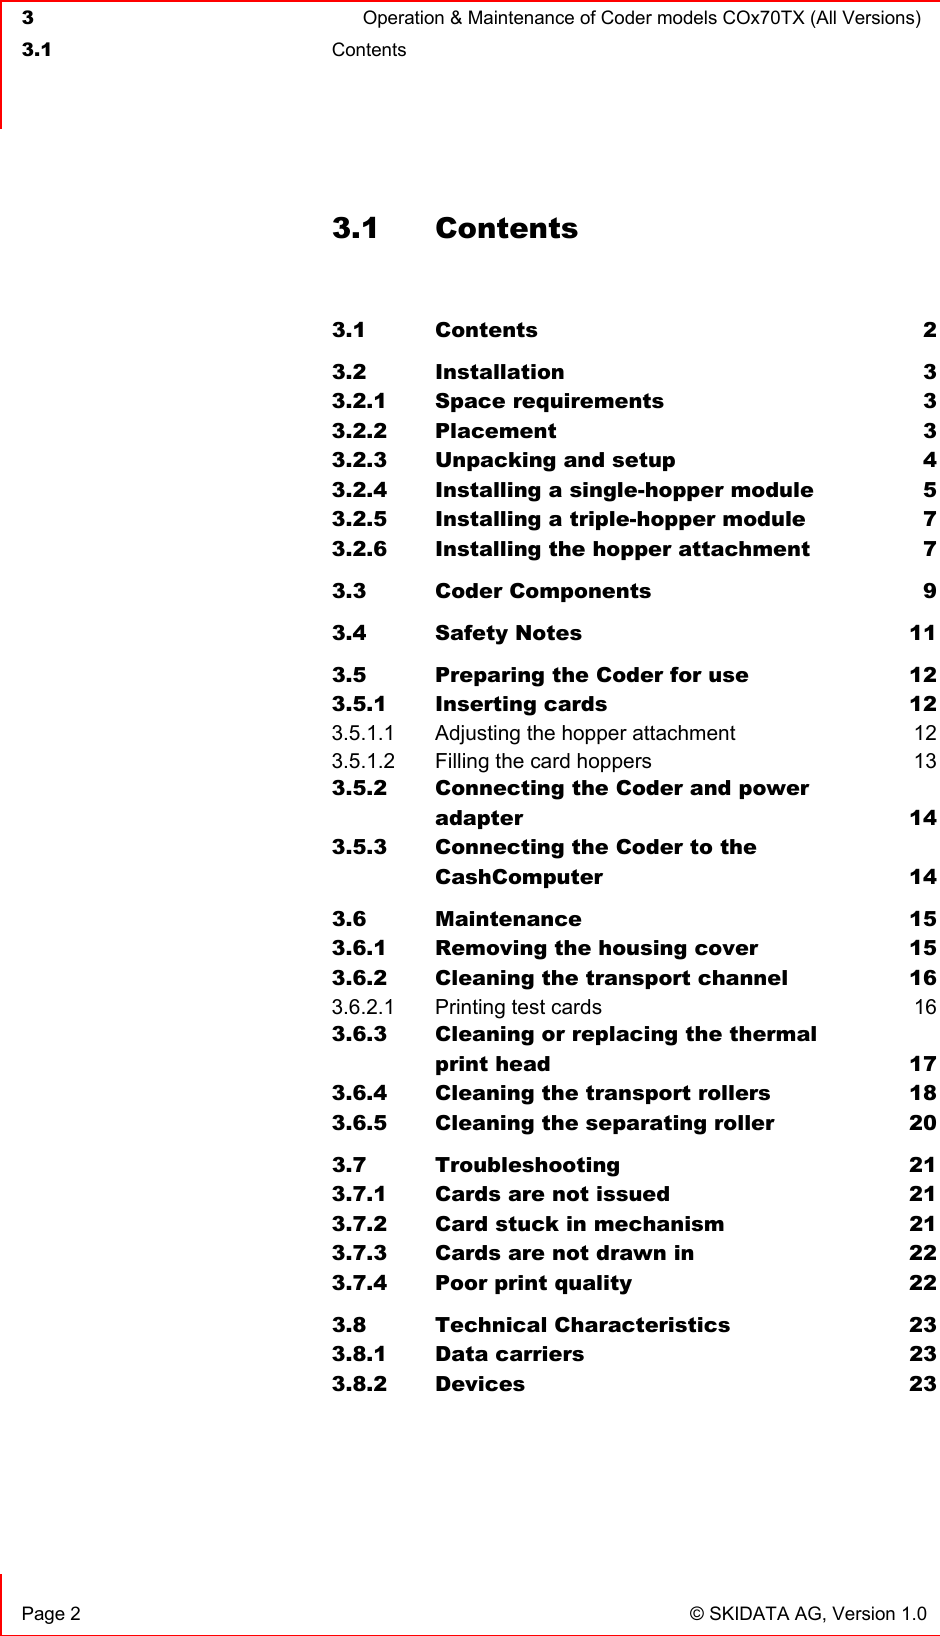  3  Operation &amp; Maintenance of Coder models COx70TX (All Versions)  3.1 Contents    Page 2  © SKIDATA AG, Version 1.0 3.1 Contents  3.1 Contents 2 3.2 Installation 3 3.2.1 Space requirements  3 3.2.2 Placement 3 3.2.3 Unpacking and setup  4 3.2.4 Installing a single-hopper module  5 3.2.5 Installing a triple-hopper module  7 3.2.6 Installing the hopper attachment  7 3.3 Coder Components  9 3.4 Safety Notes  11 3.5 Preparing the Coder for use  12 3.5.1 Inserting cards  12 3.5.1.1 Adjusting the hopper attachment  12 3.5.1.2 Filling the card hoppers  13 3.5.2 Connecting the Coder and power  adapter 14 3.5.3 Connecting the Coder to the  CashComputer 14 3.6 Maintenance 15 3.6.1 Removing the housing cover  15 3.6.2 Cleaning the transport channel  16 3.6.2.1 Printing test cards  16 3.6.3 Cleaning or replacing the thermal  print head  17 3.6.4 Cleaning the transport rollers  18 3.6.5 Cleaning the separating roller  20 3.7 Troubleshooting 21 3.7.1 Cards are not issued  21 3.7.2 Card stuck in mechanism  21 3.7.3 Cards are not drawn in  22 3.7.4 Poor print quality  22 3.8 Technical Characteristics  23 3.8.1 Data carriers  23 3.8.2 Devices 23  